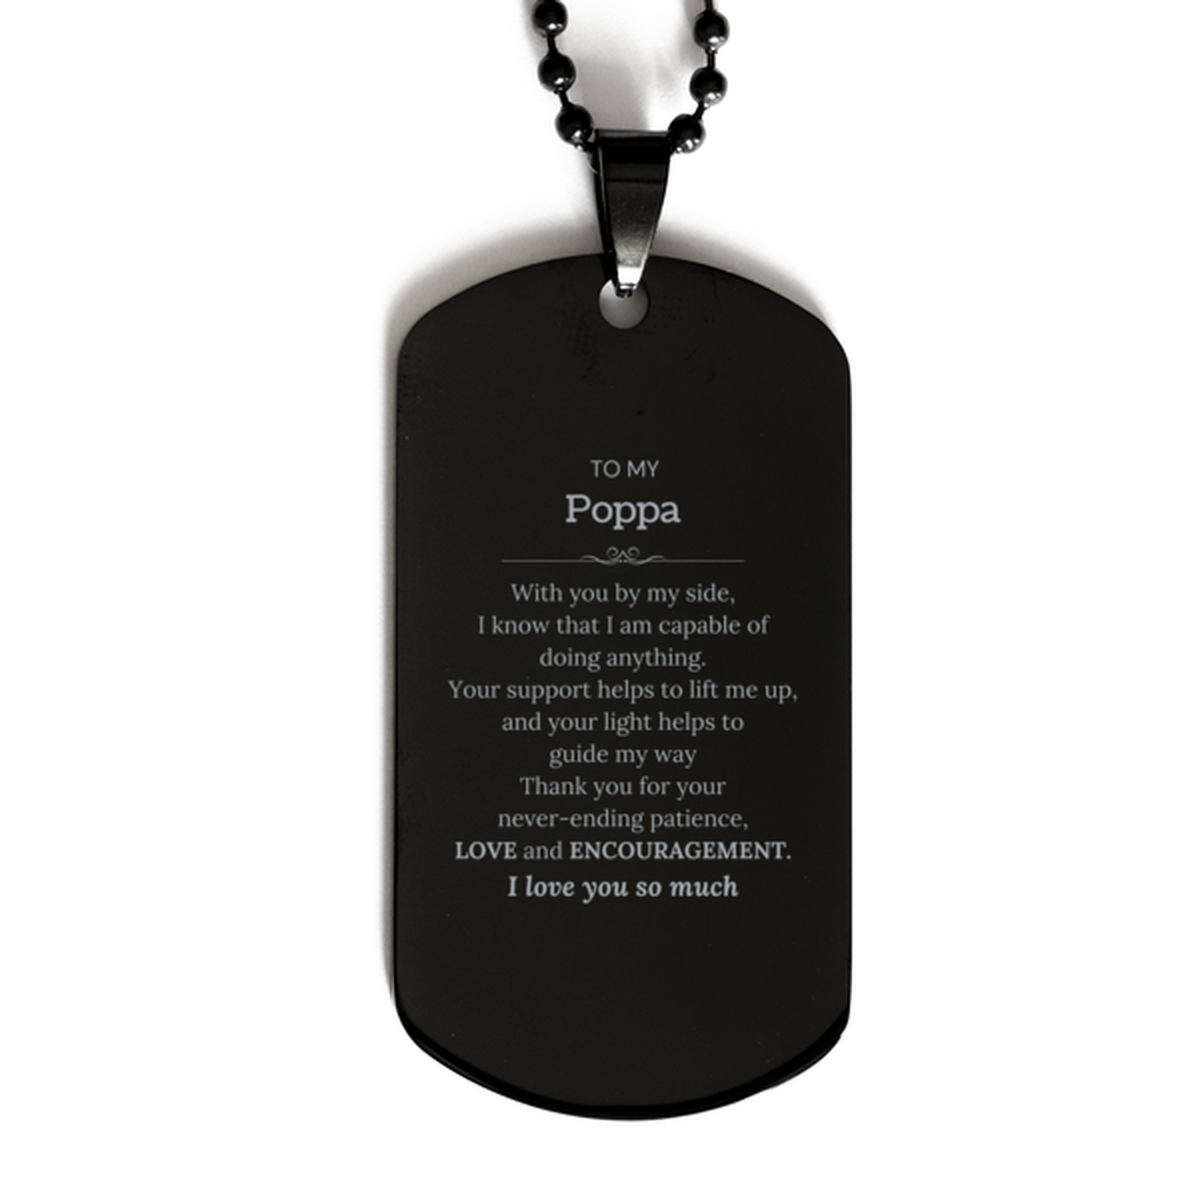 Appreciation Poppa Black Dog Tag Gifts, To My Poppa Birthday Christmas Wedding Keepsake Gifts for Poppa With you by my side, I know that I am capable of doing anything. I love you so much